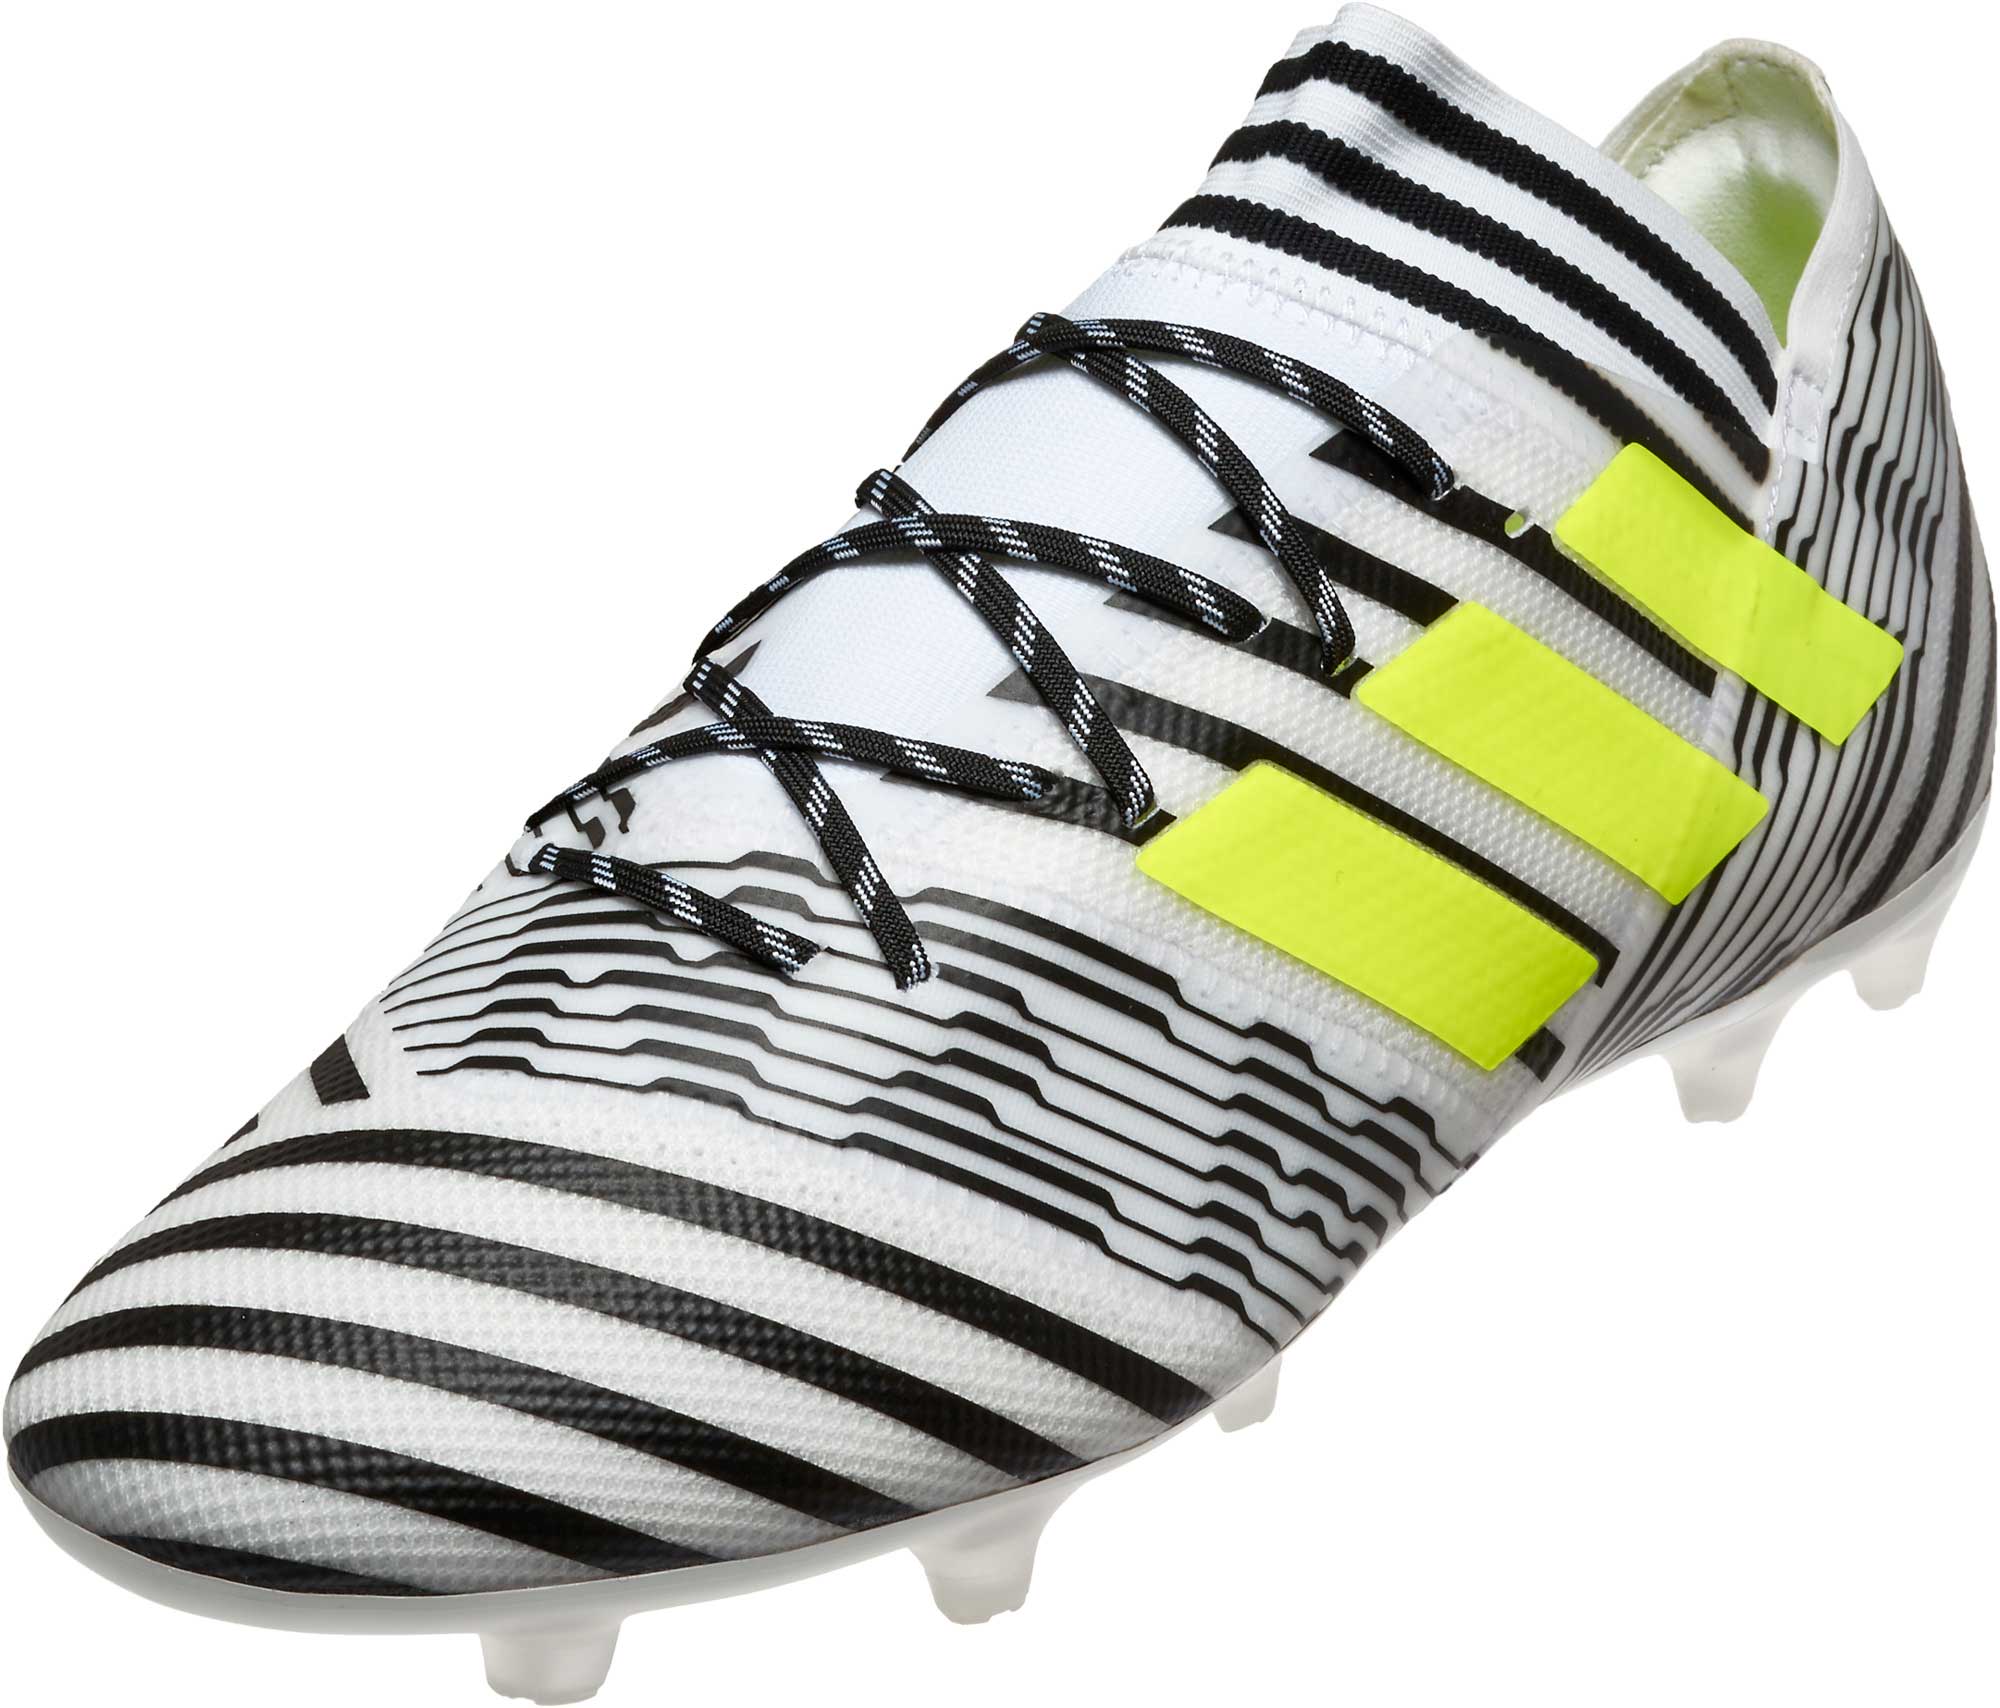 adidas 17.2 soccer cleats